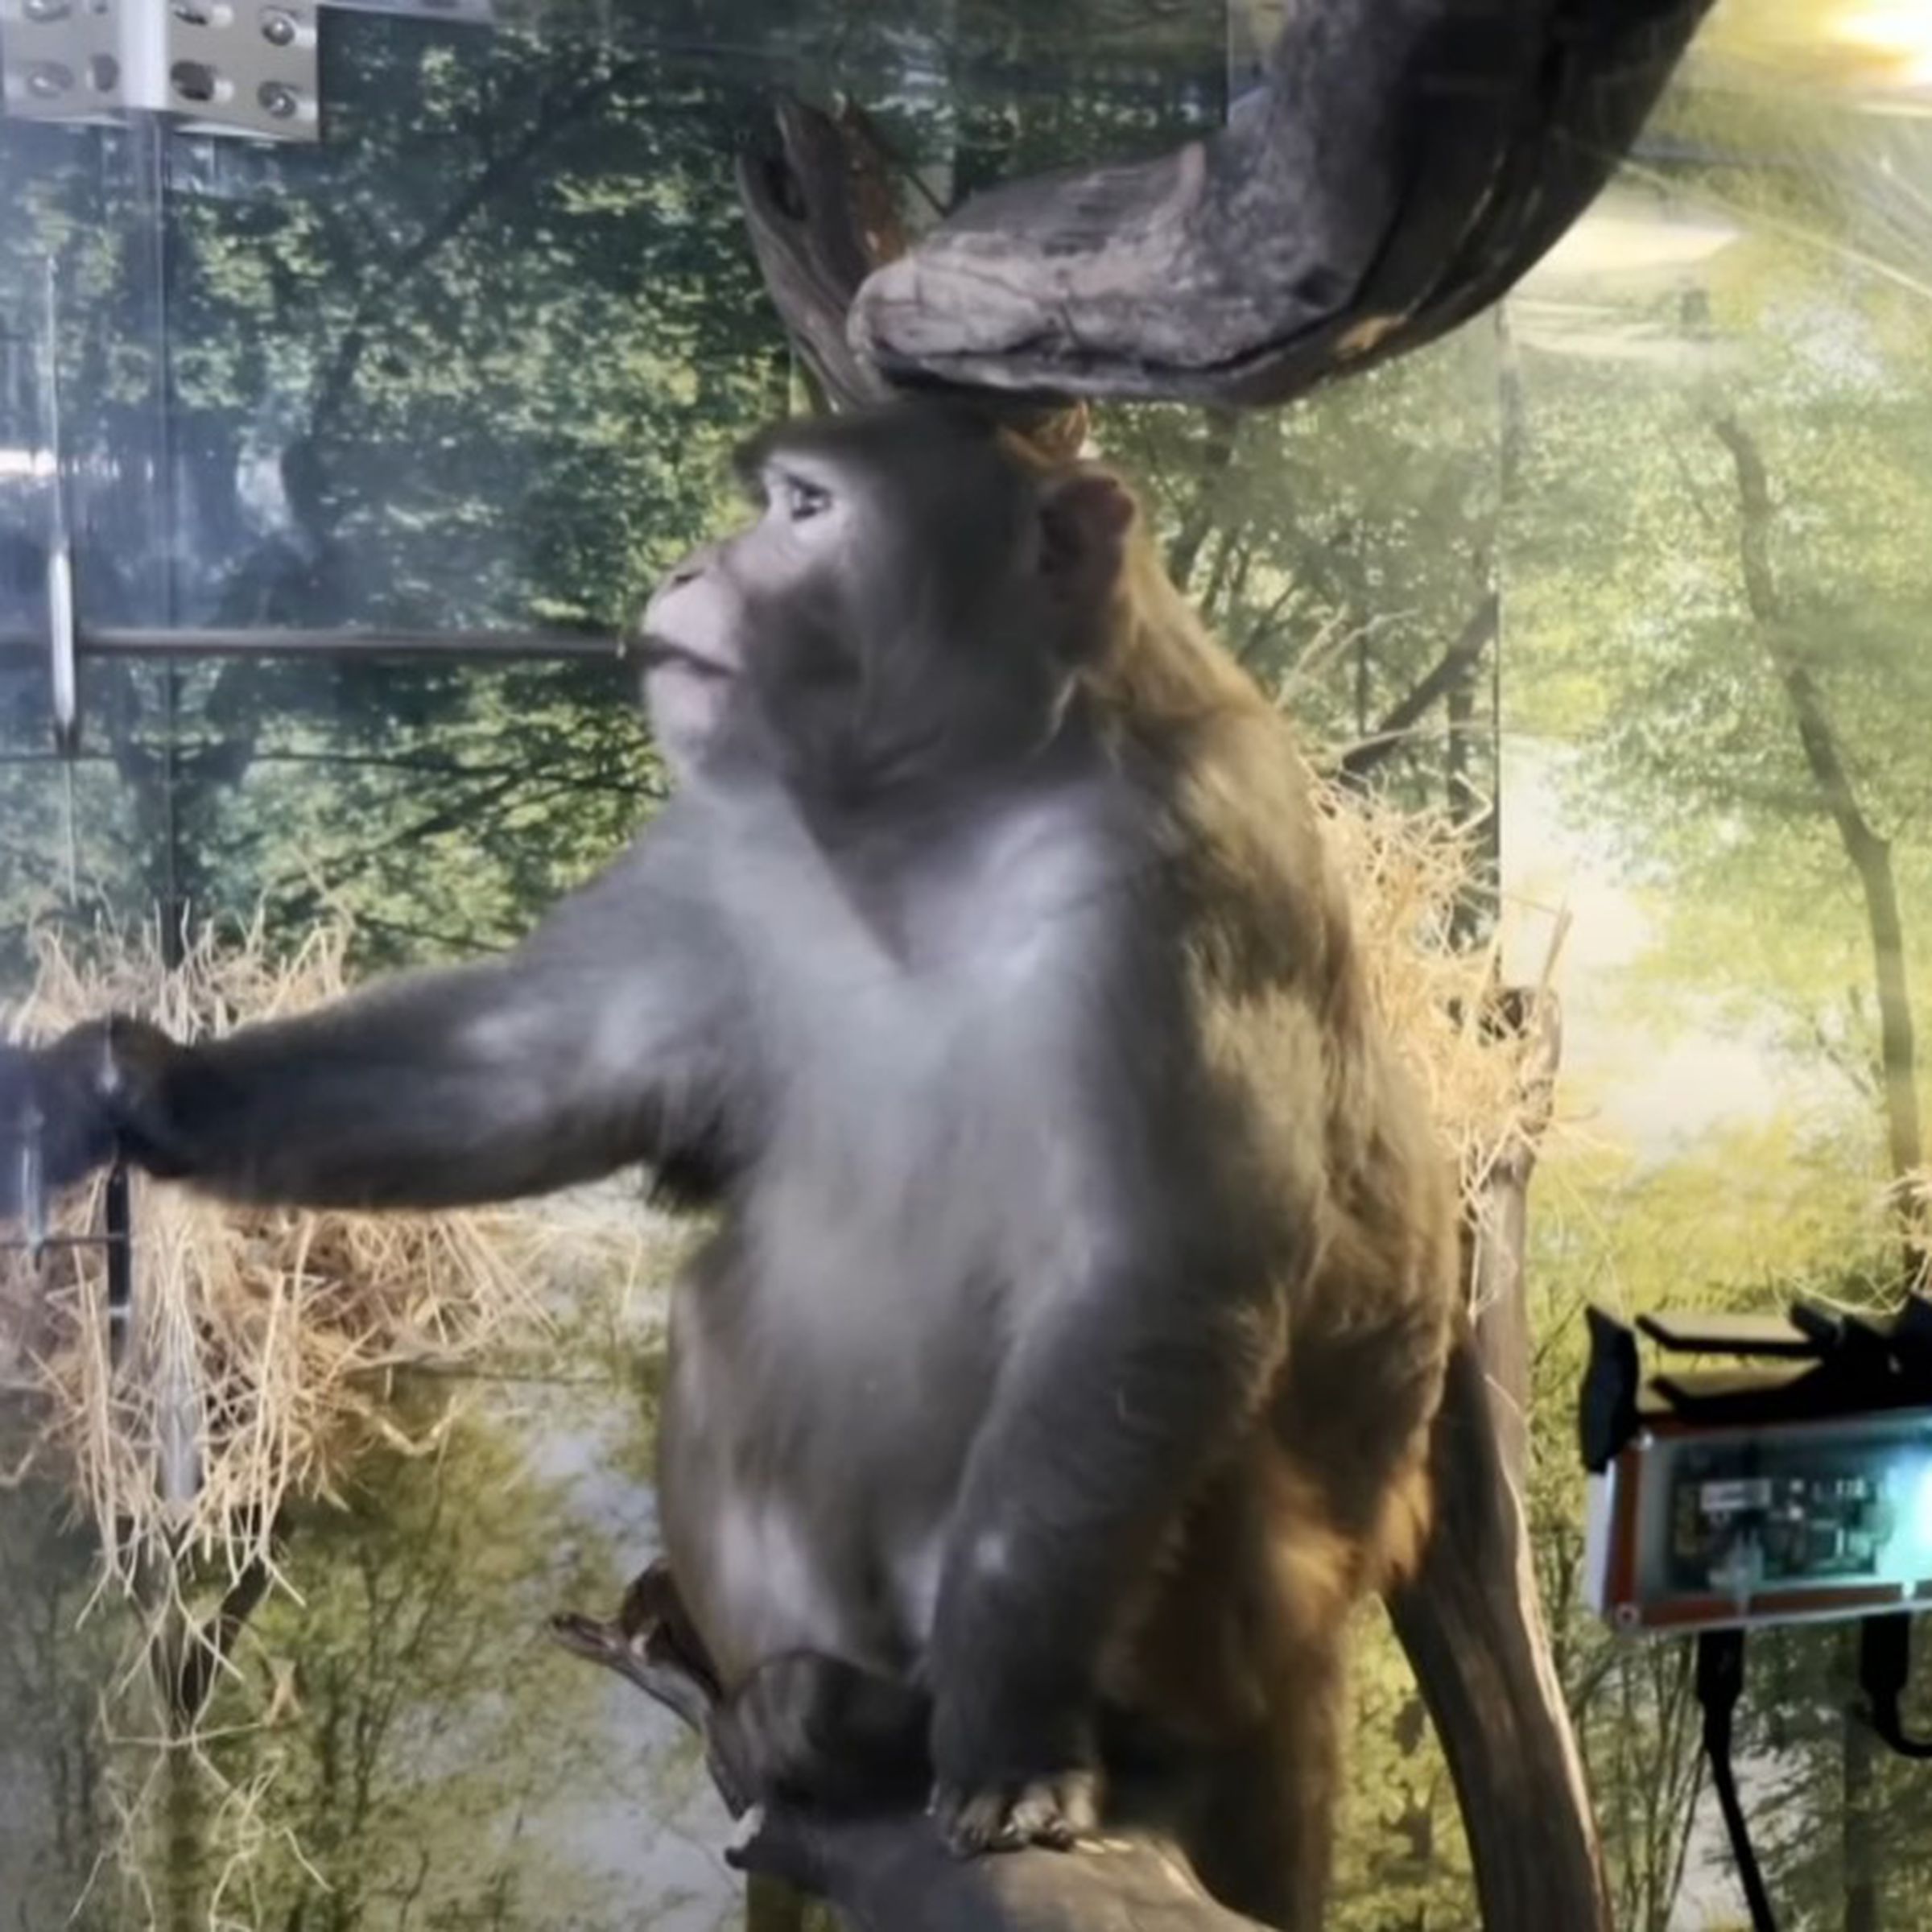 A monkey sucks on a banana smoothie straw placed such that its head bumps up against an embedded wireless charger in a tree branch.